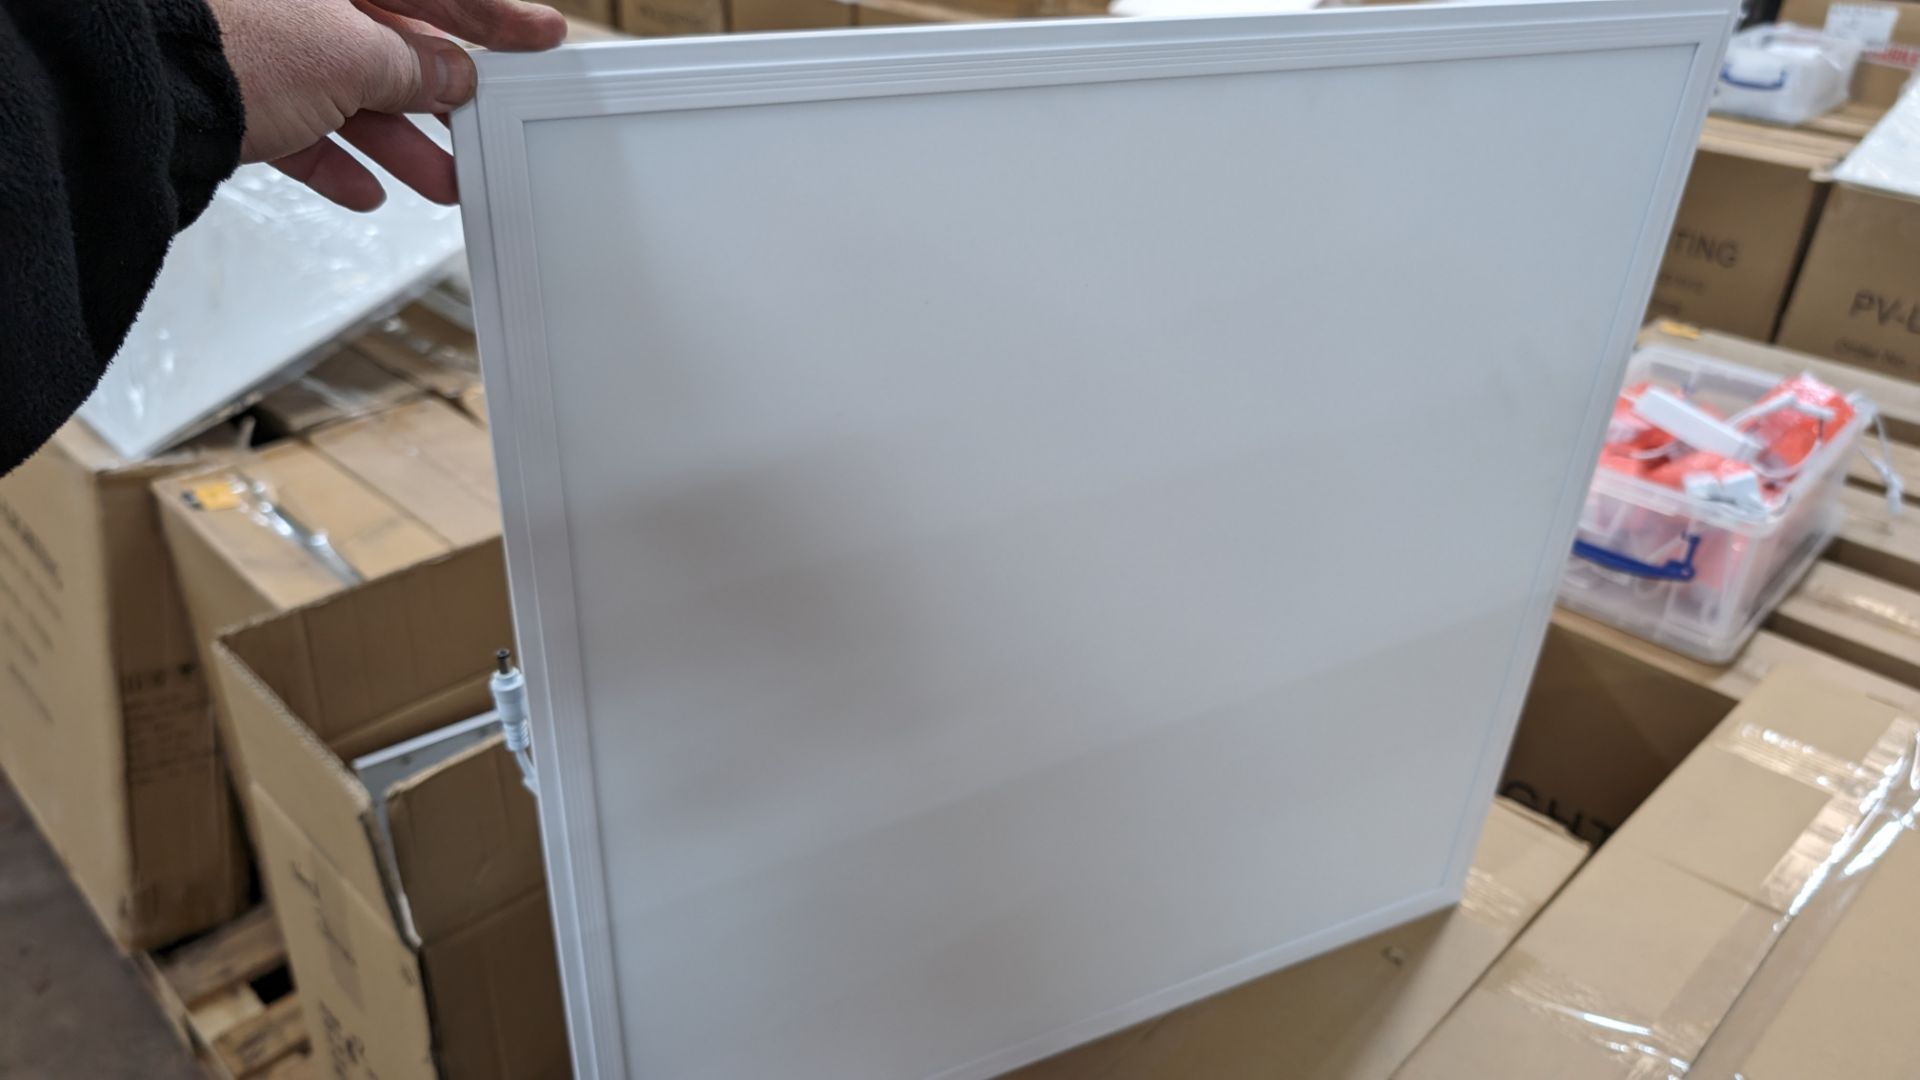 12 off 595mm x 595mm 5500k 45w LED lighting panels, each including driver - 1 carton - Image 3 of 4